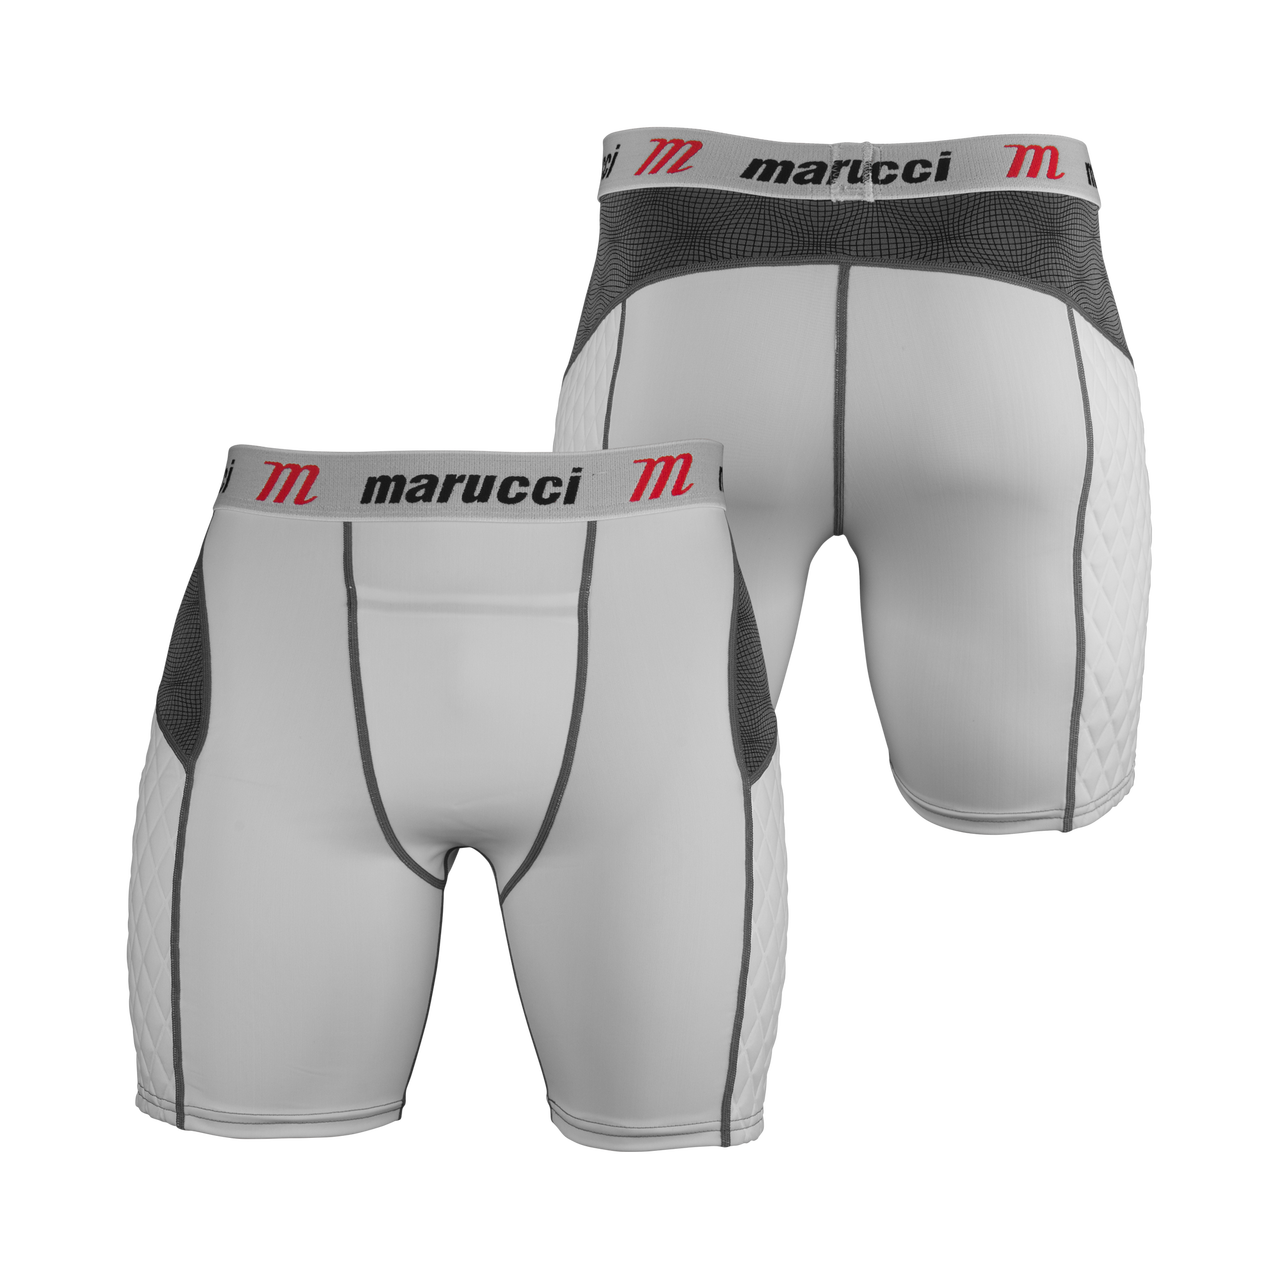 Marucci Youth Elite Padded Sliding Short with Cup Accessories MARUCCI YS White 